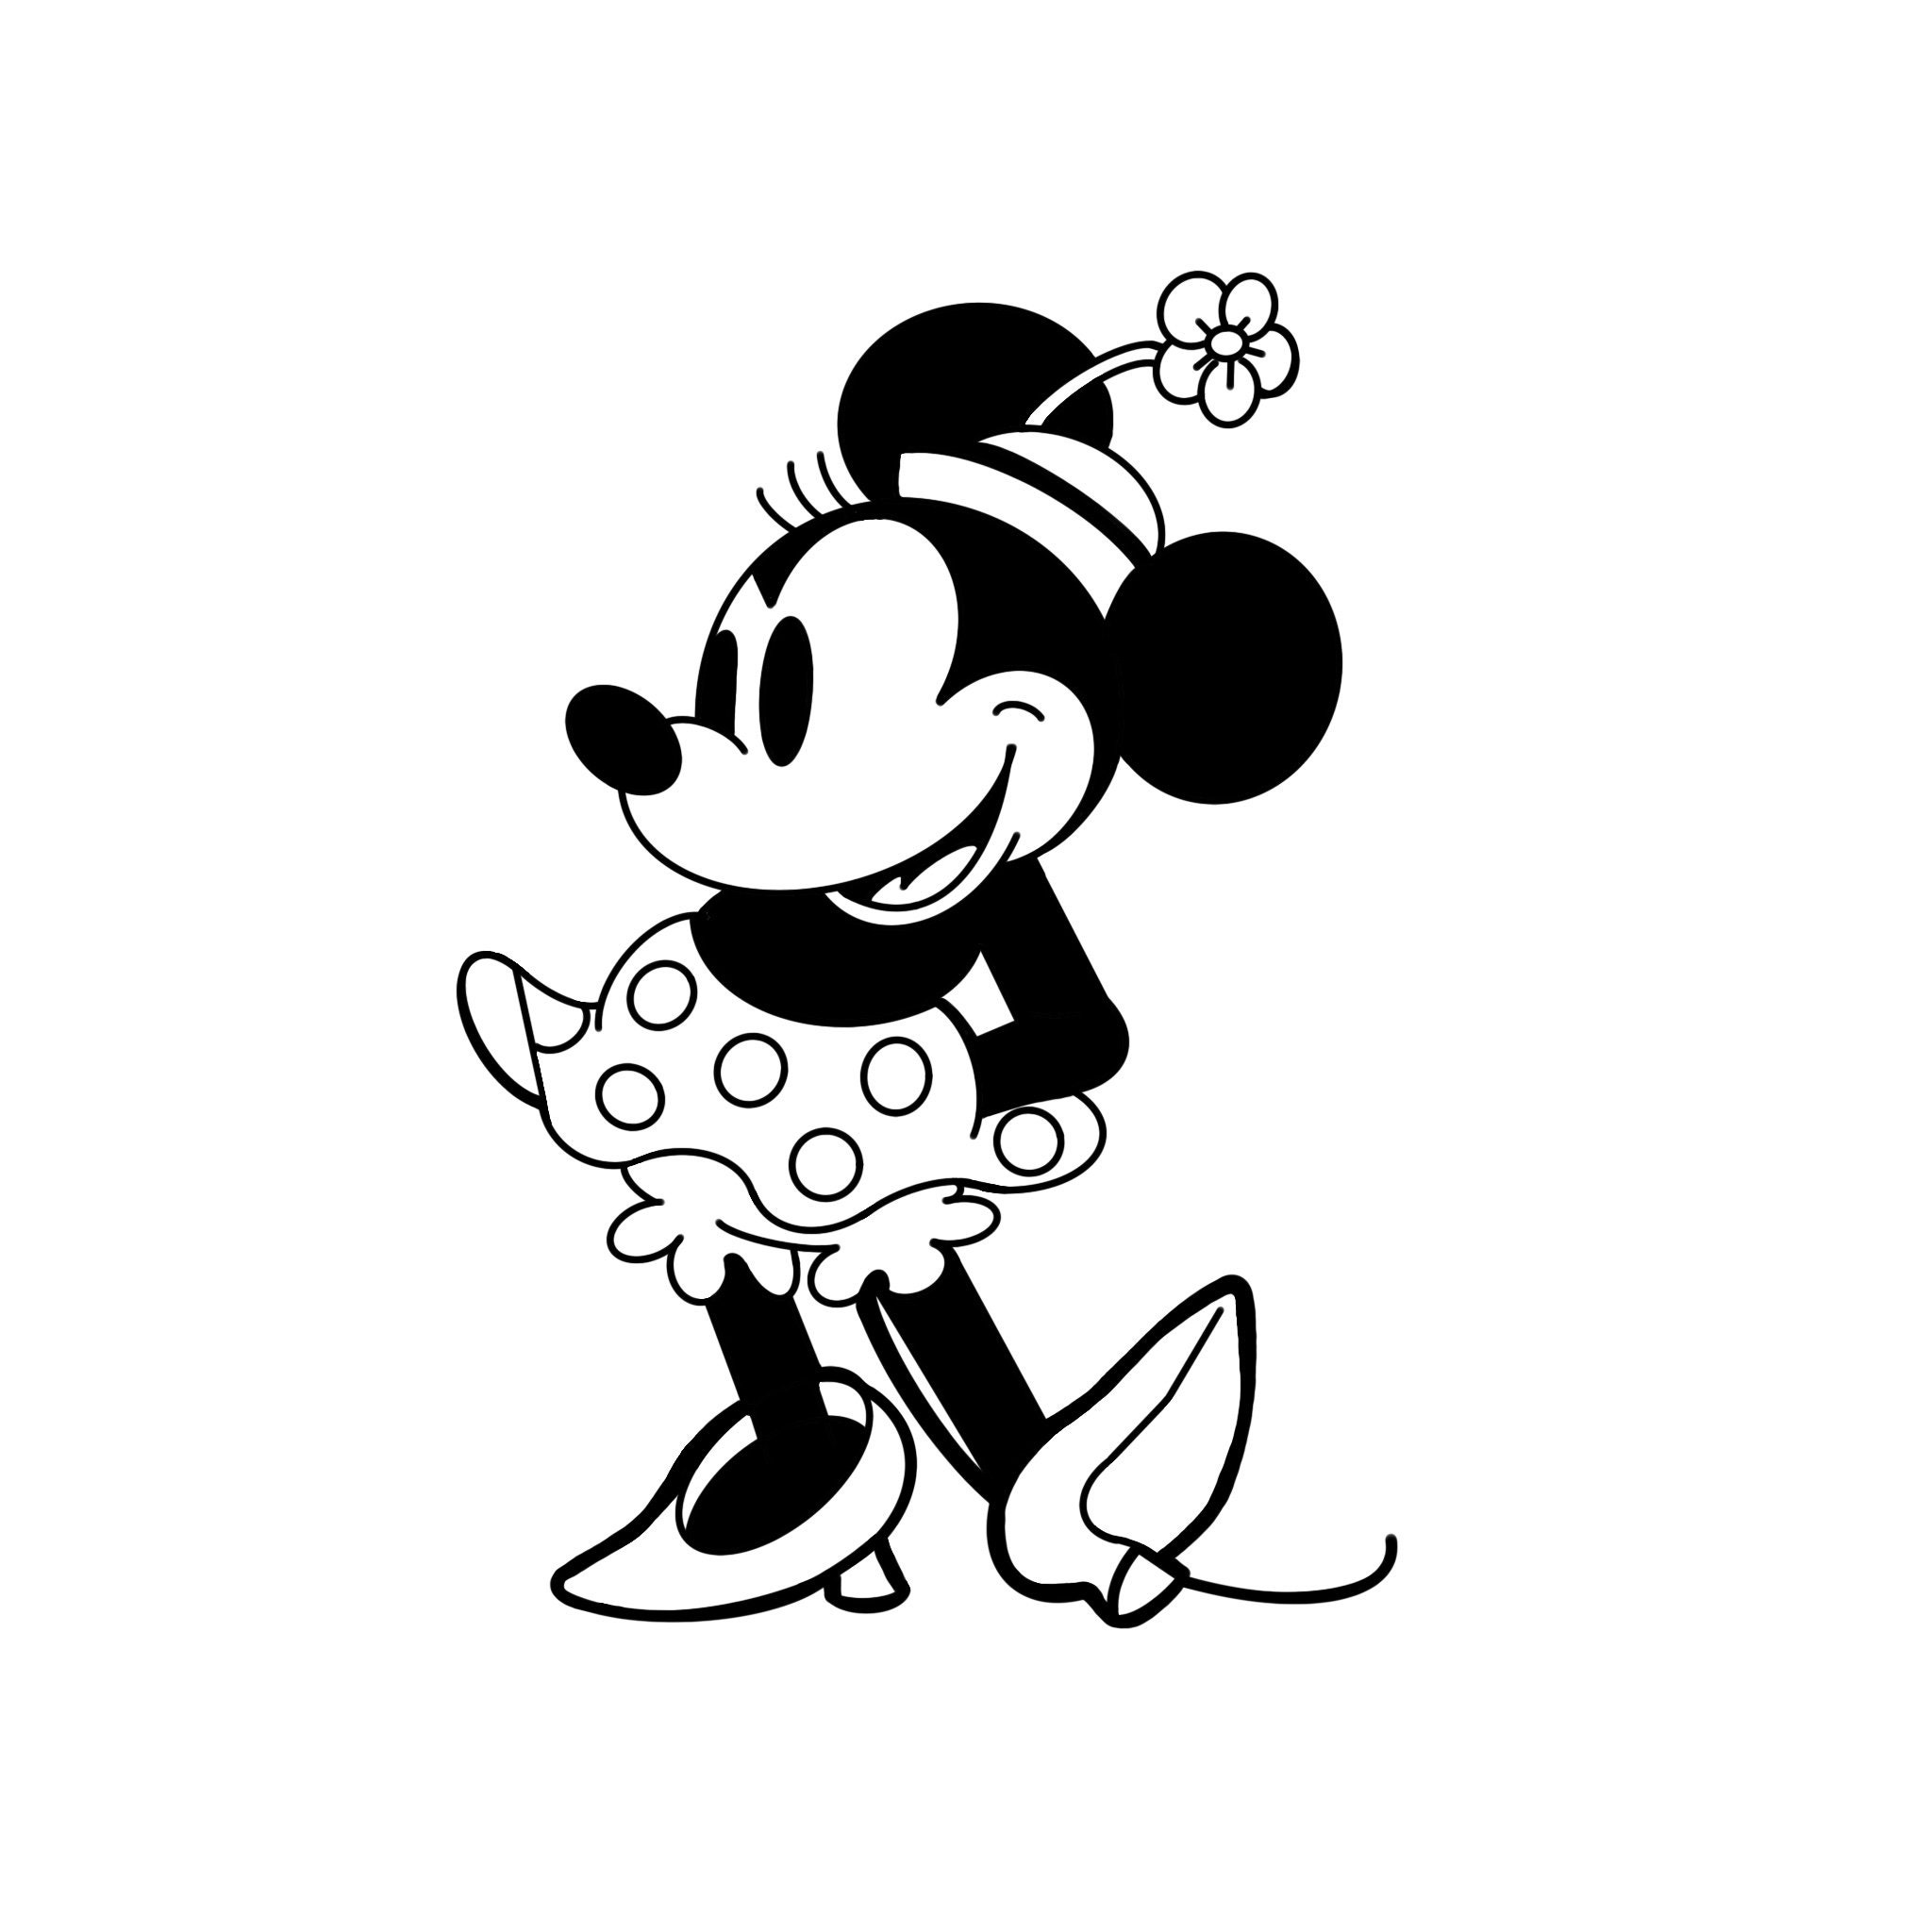 Discover more than 141 minnie mouse sketch best - in.eteachers